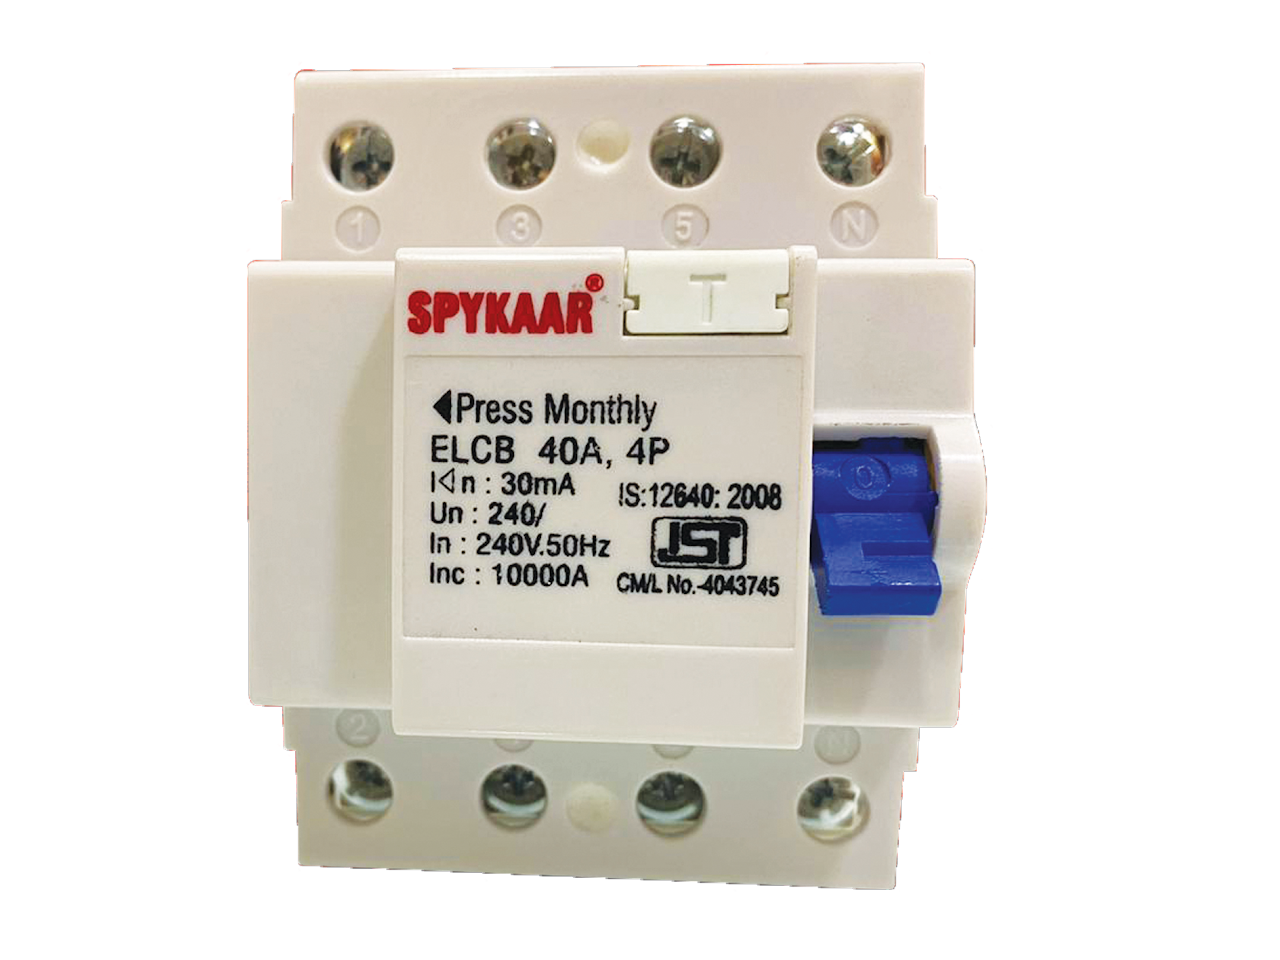 Spykaar Total Cable Solution